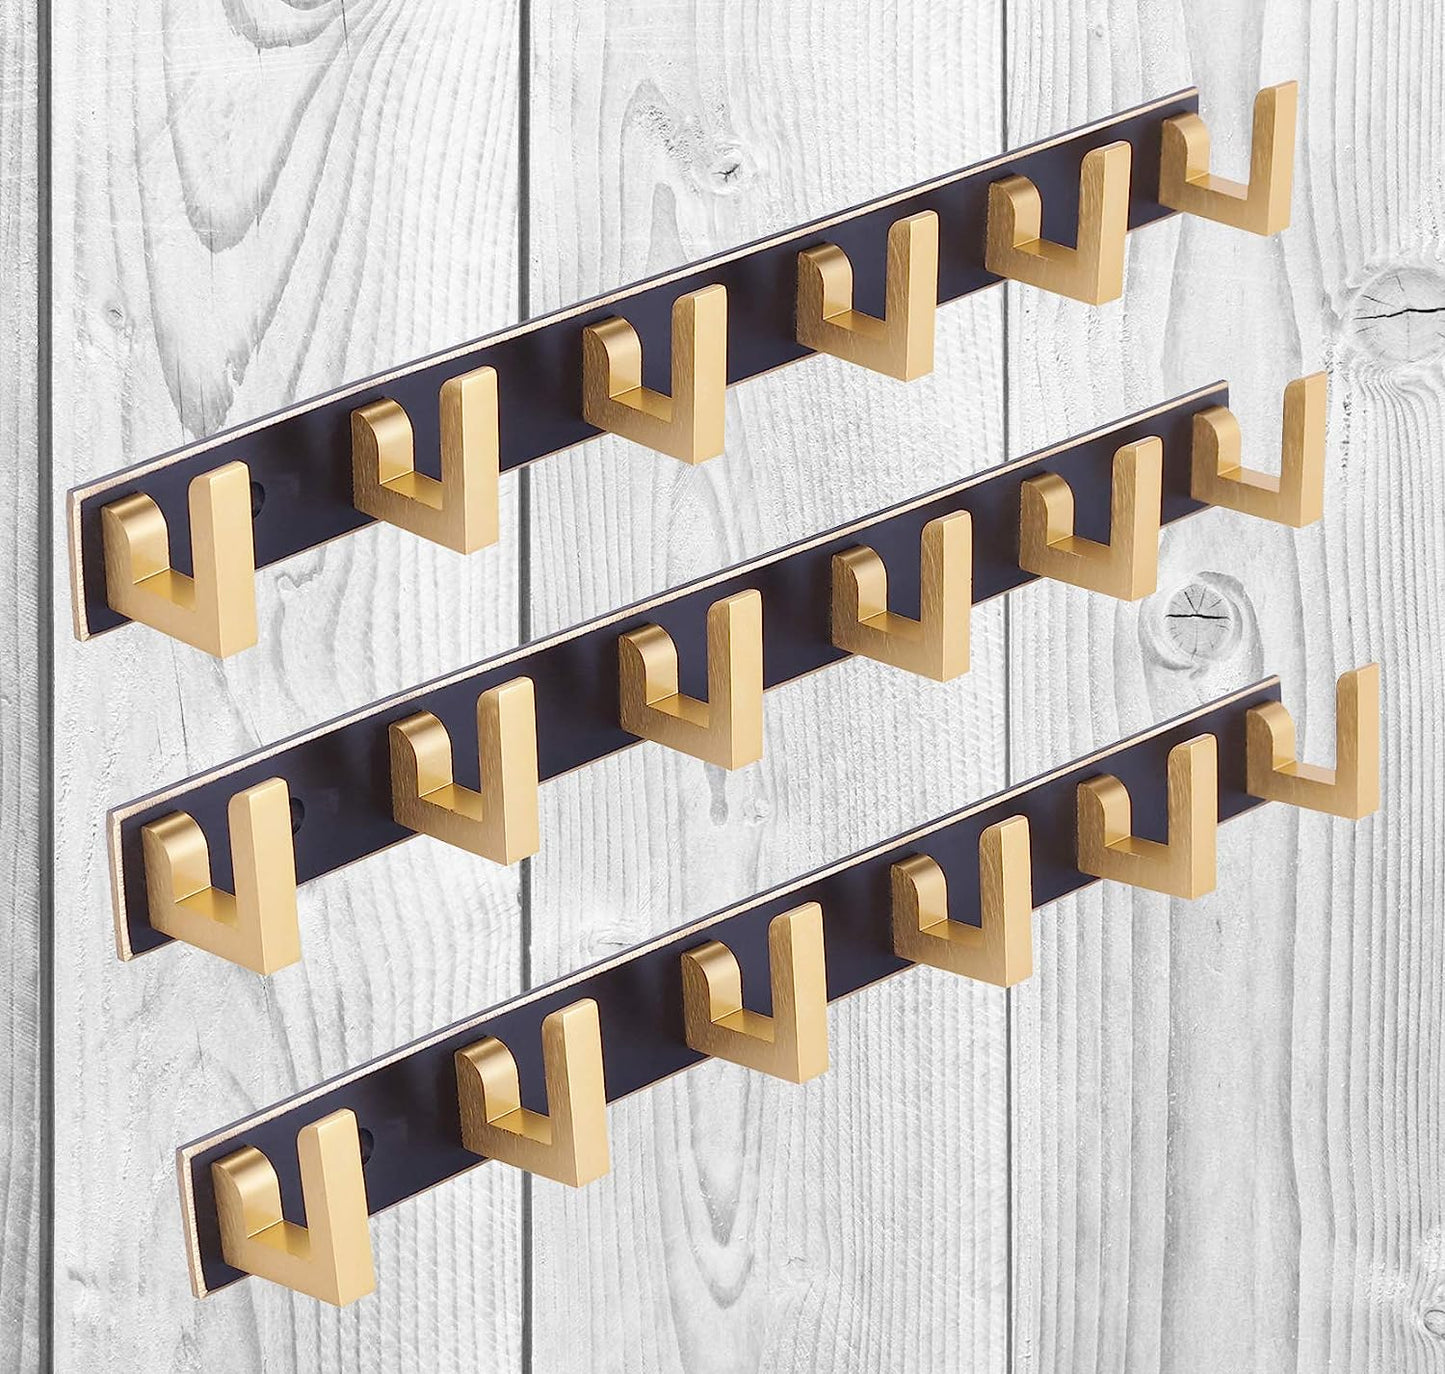 DOCOSS-Pack Of 1.2,3 -Exclusive Extra Long 40 cm Gold Black 6 Pin Metal cloth hangers for wall Door Cloth Hook Bathroom Wall Hooks Rail for Hanging Clothes,Towel Bathroom Accessories